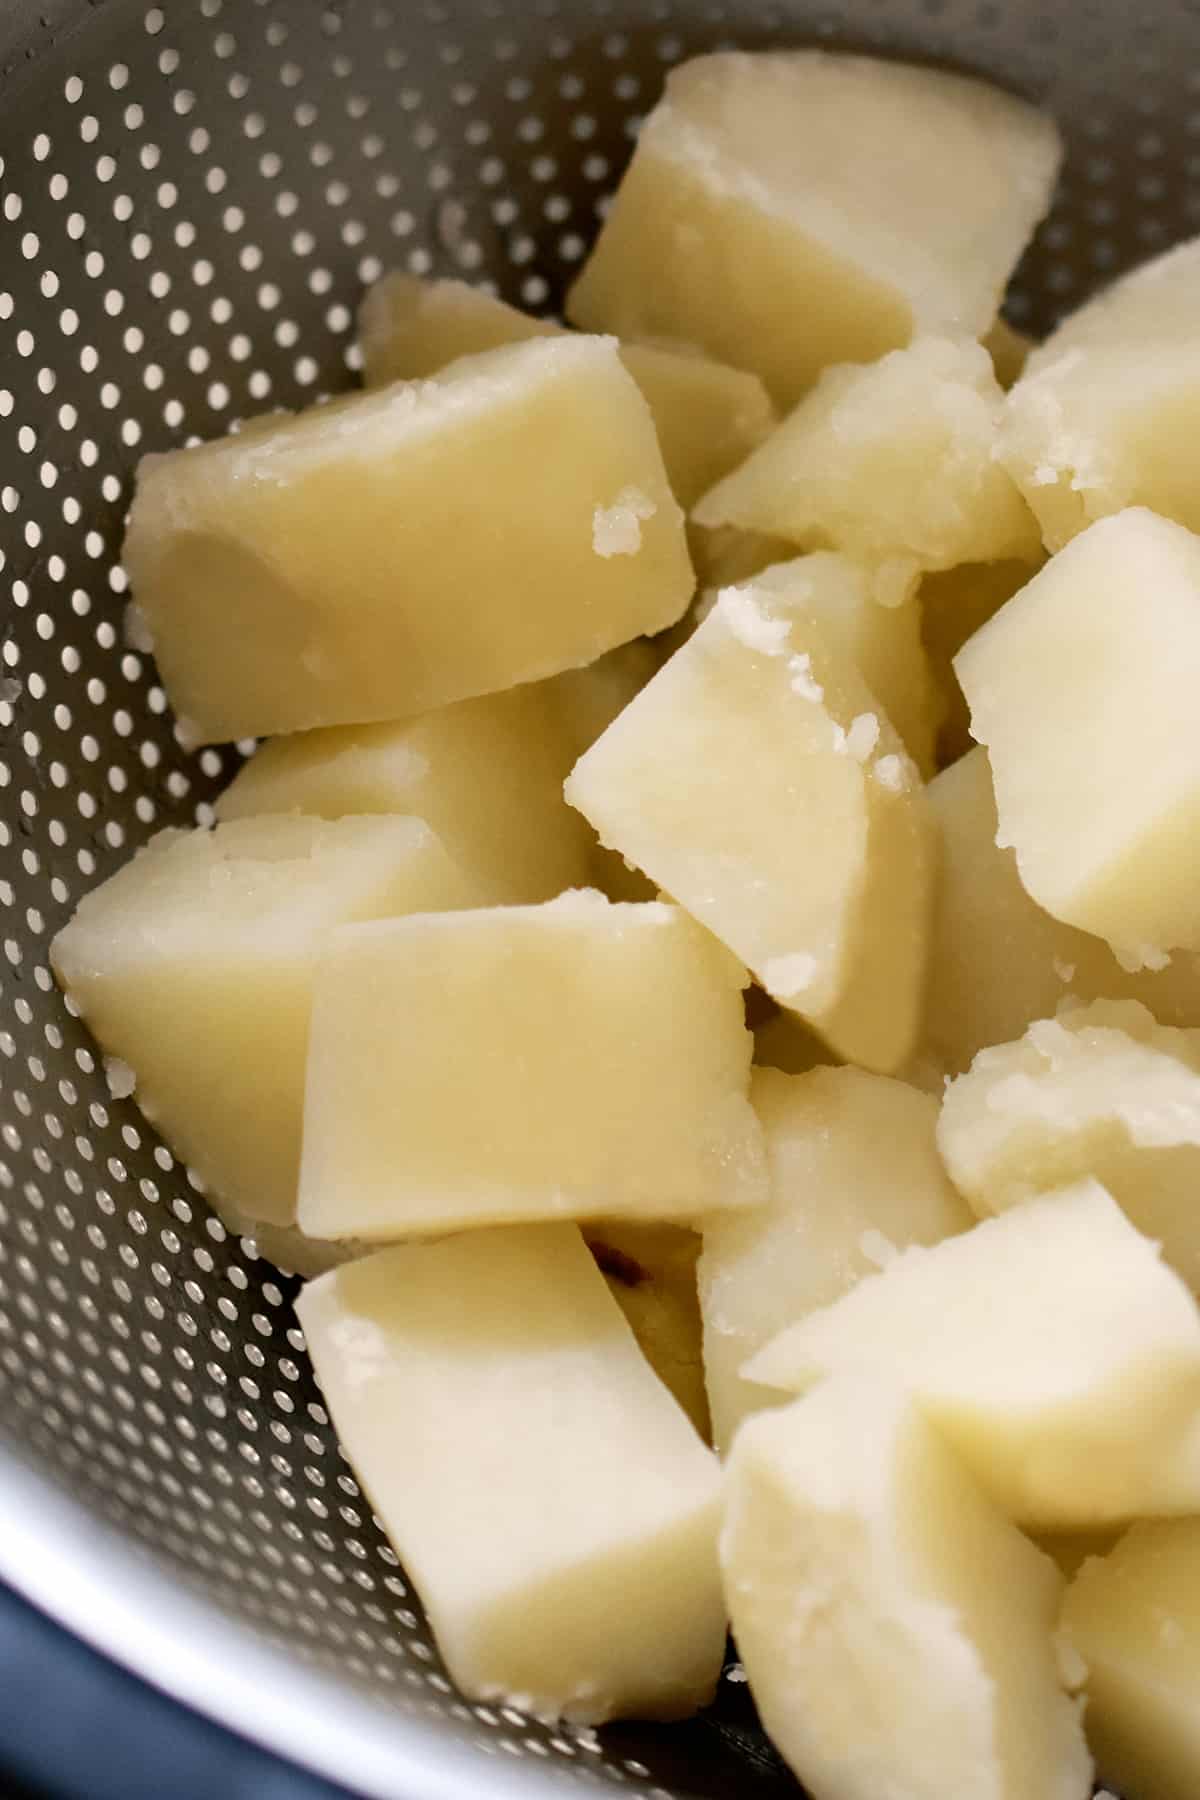 Boiled russet potato cubes in a colander.